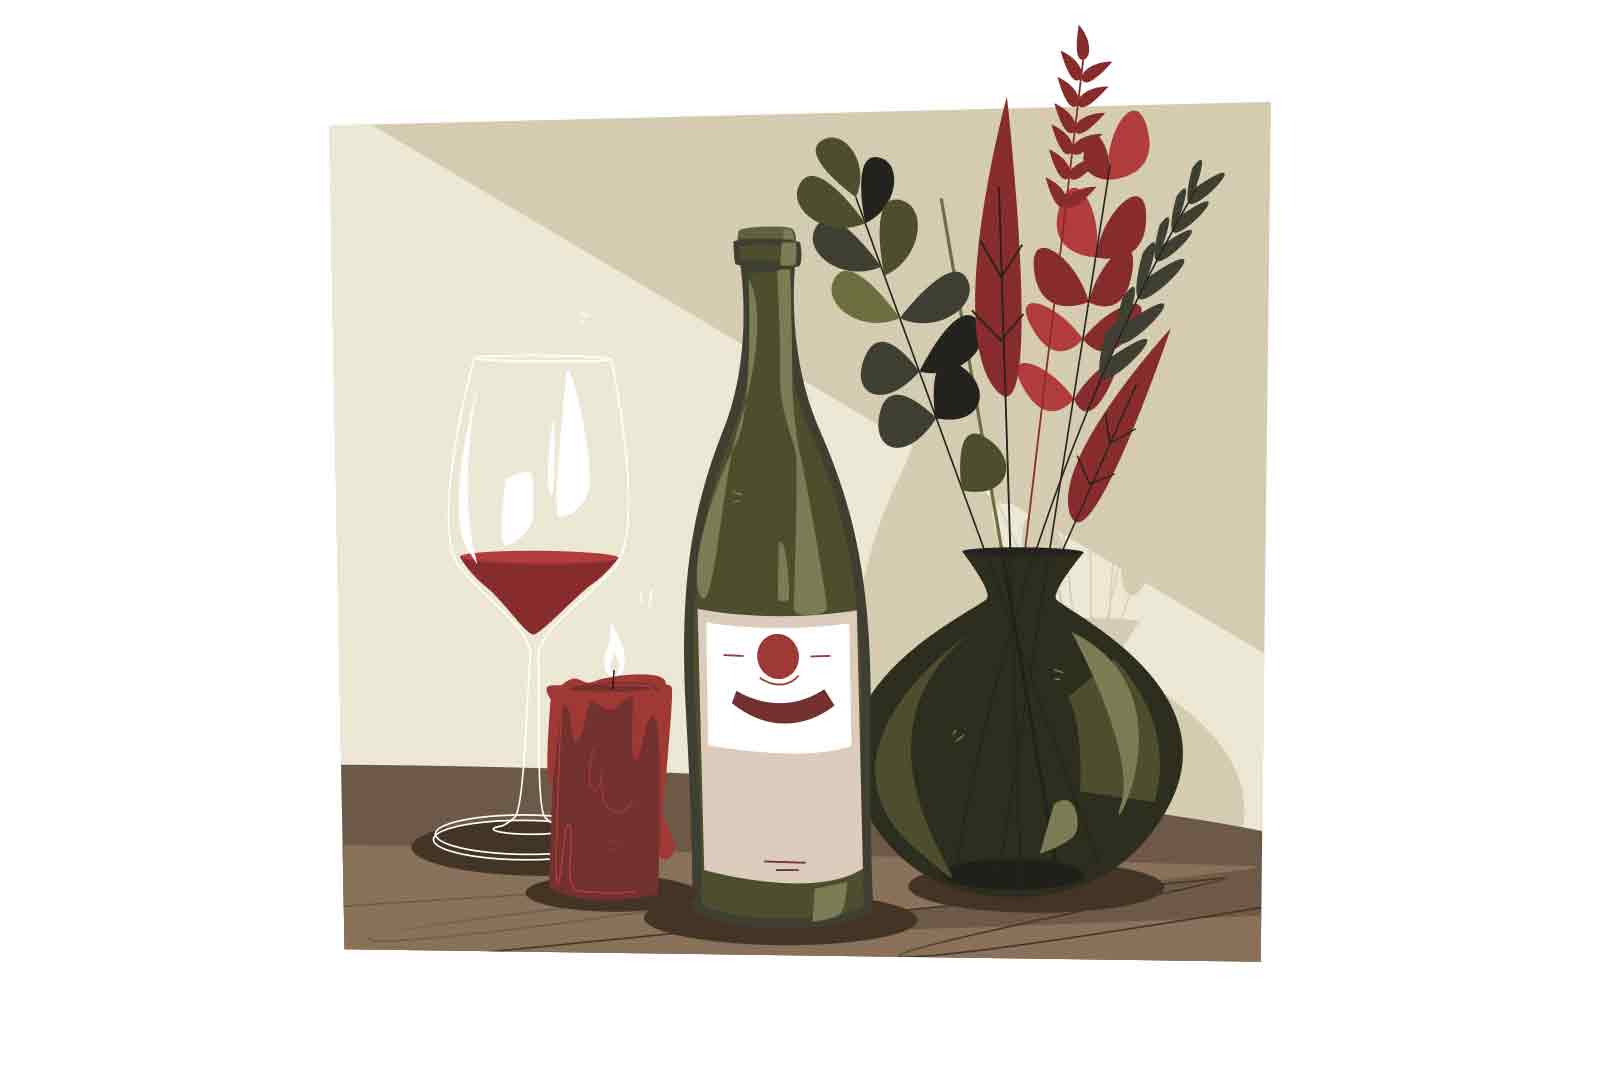 Romantic wine set vector illustration. Bottle of red wine, wineglass, candle and vase with flowers flat style concept